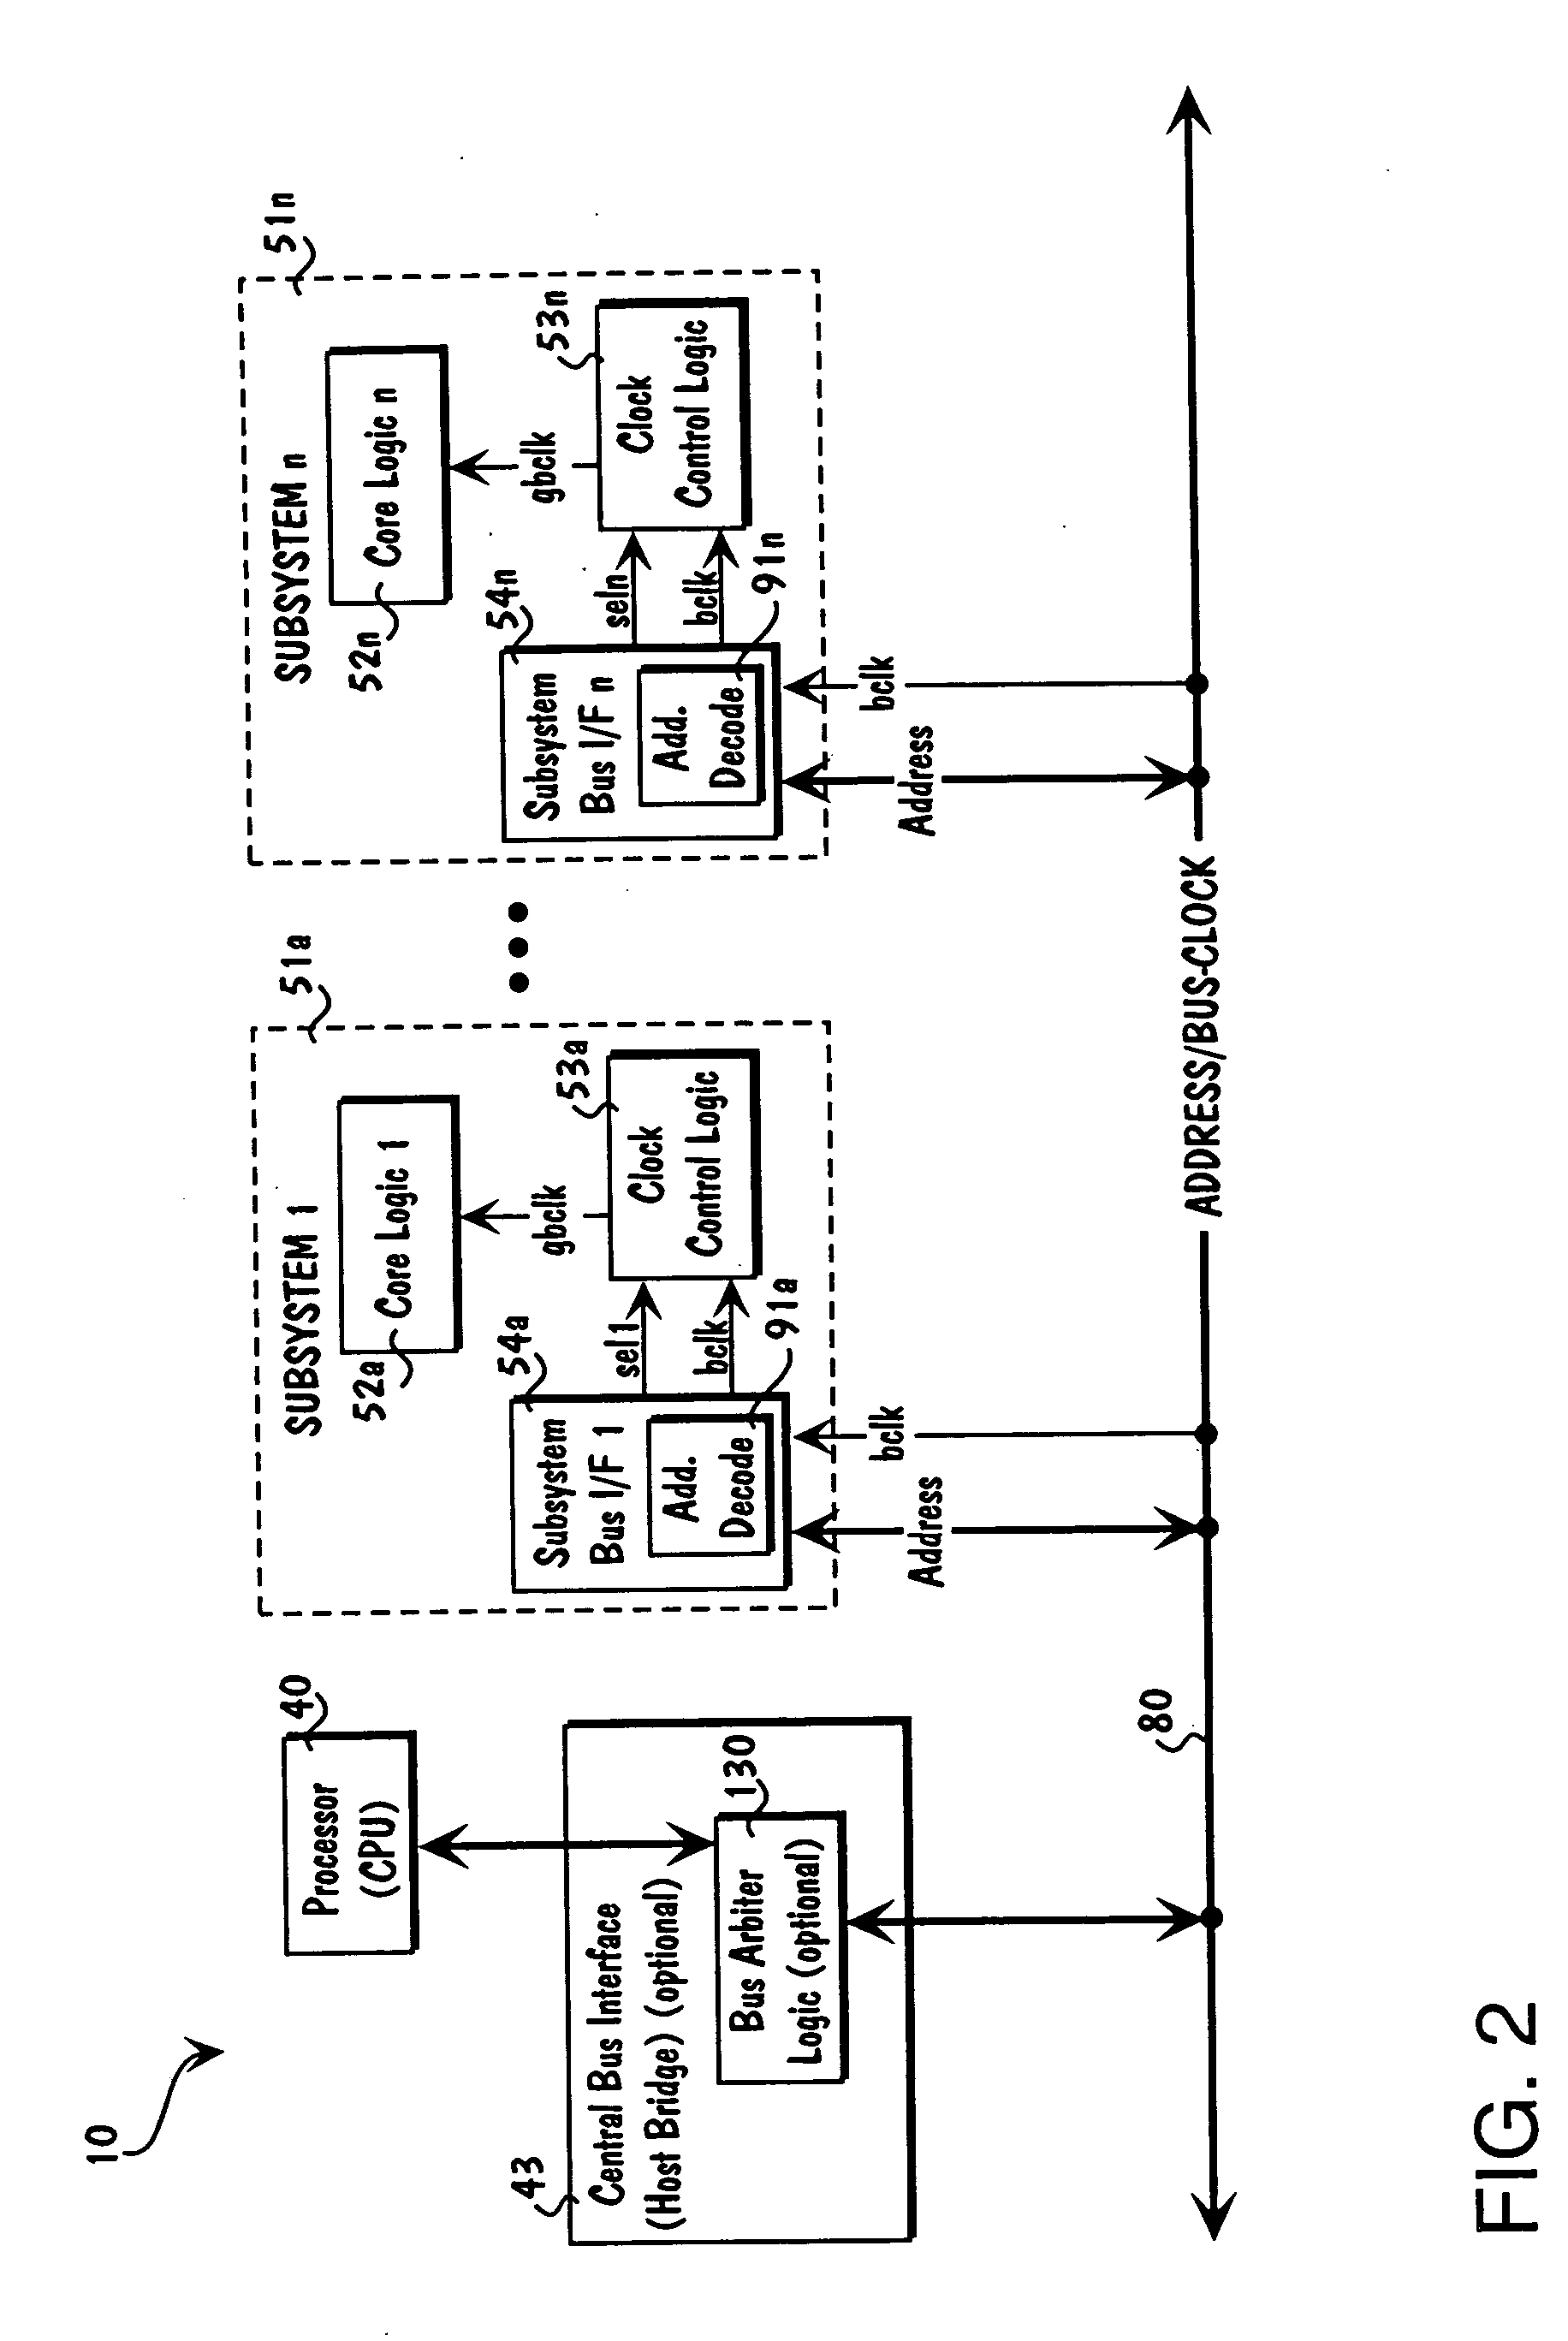 Method for modular design of a computer system-on-a-chip